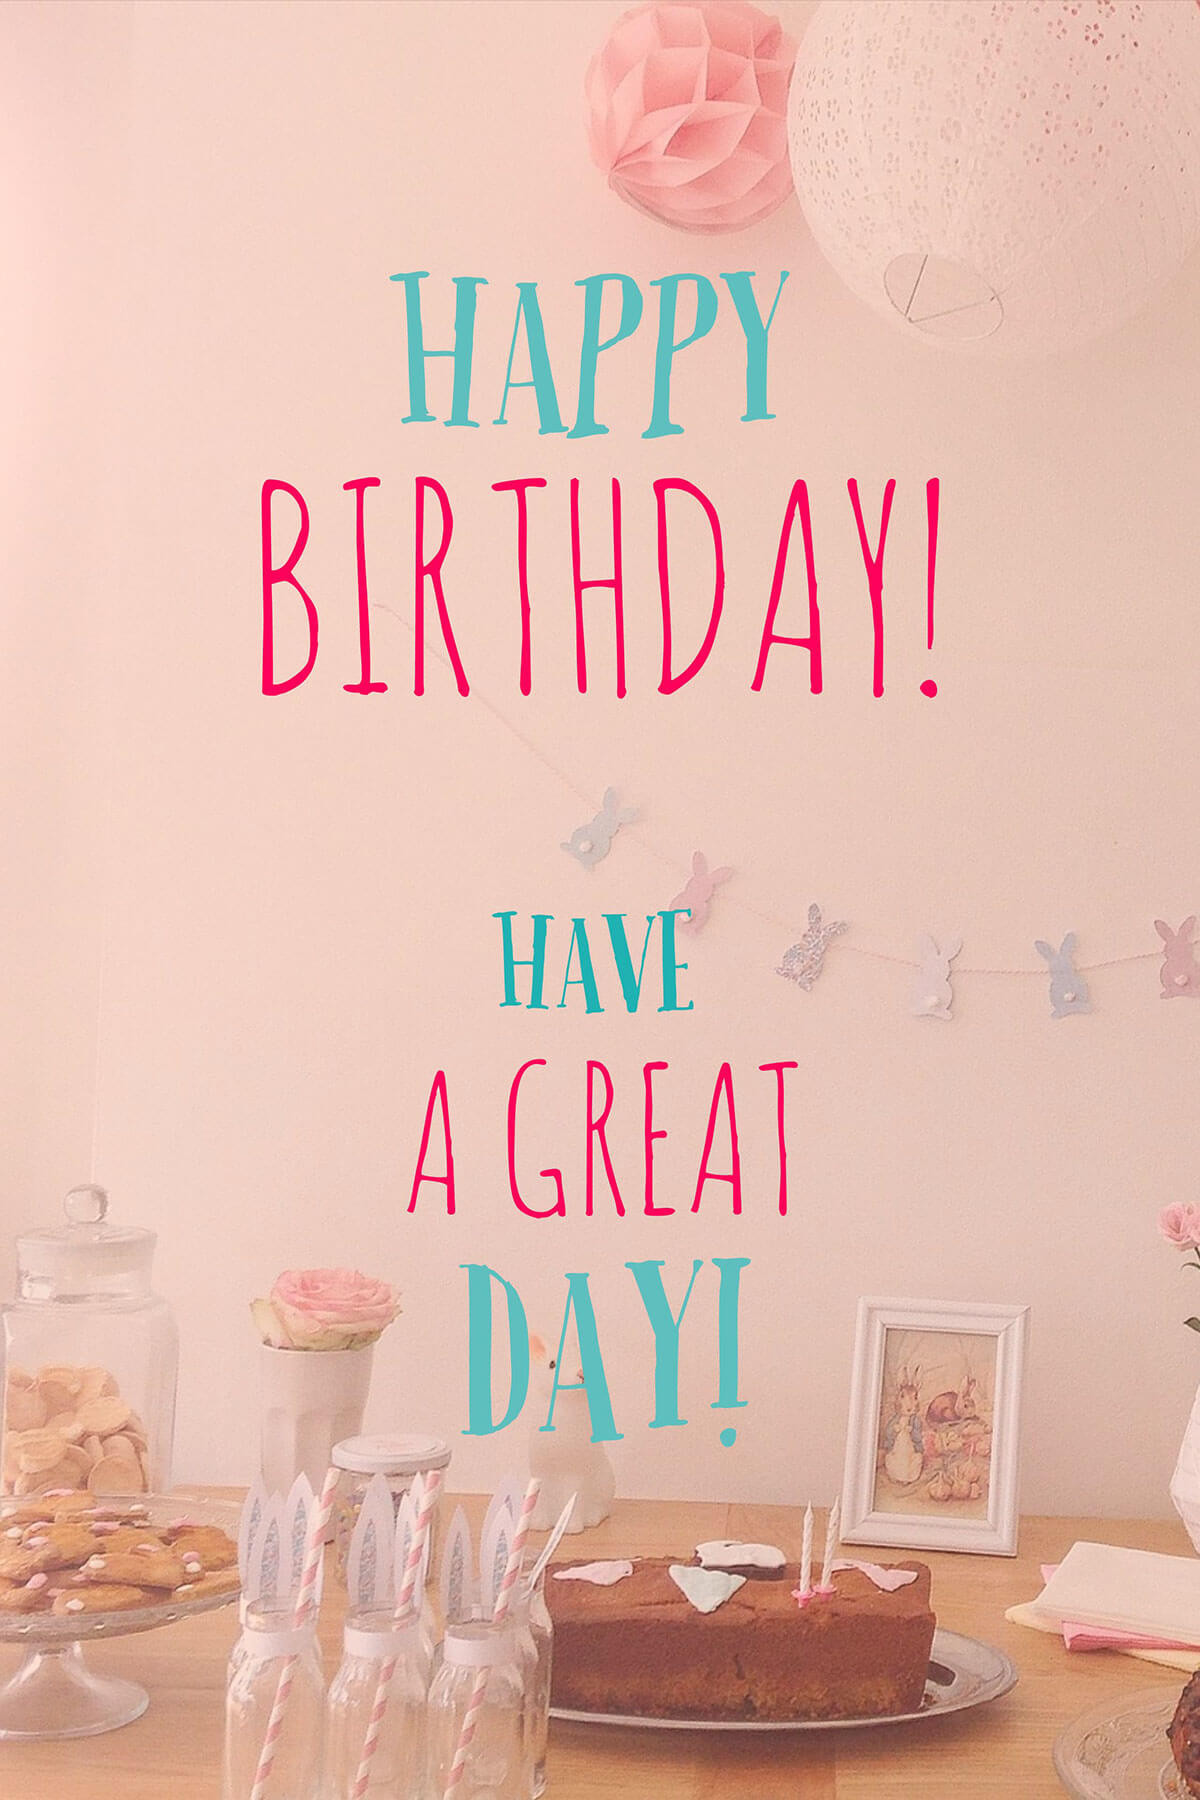 Free Personalized Birthday Cards
 Free line Card Maker Create Custom Greeting Cards